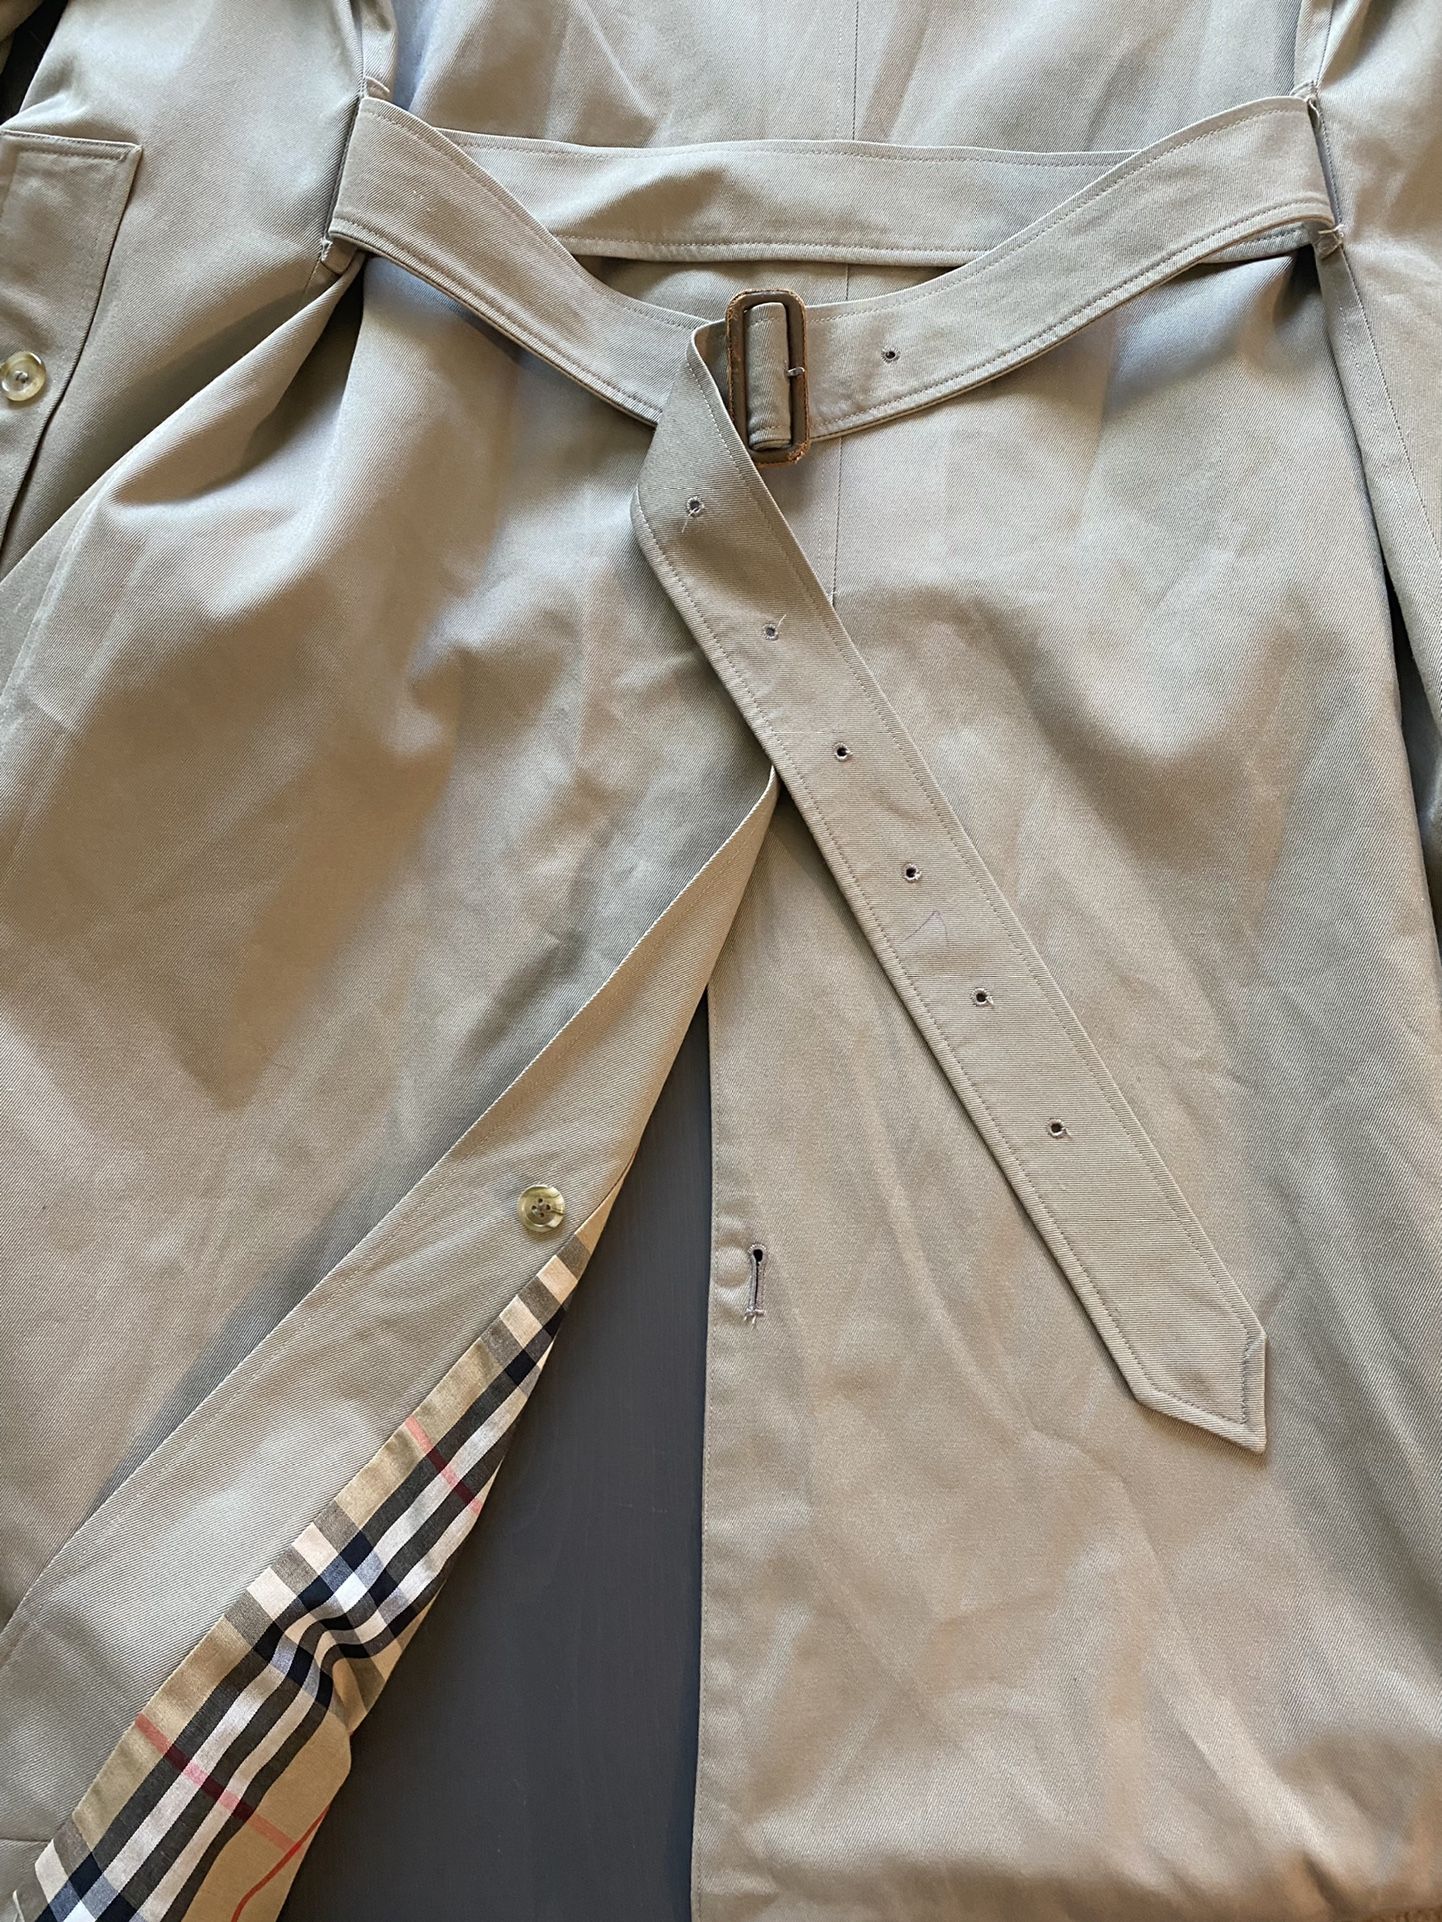 Vintage Burberry Trench Coat for Sale in Charlotte, NC - OfferUp